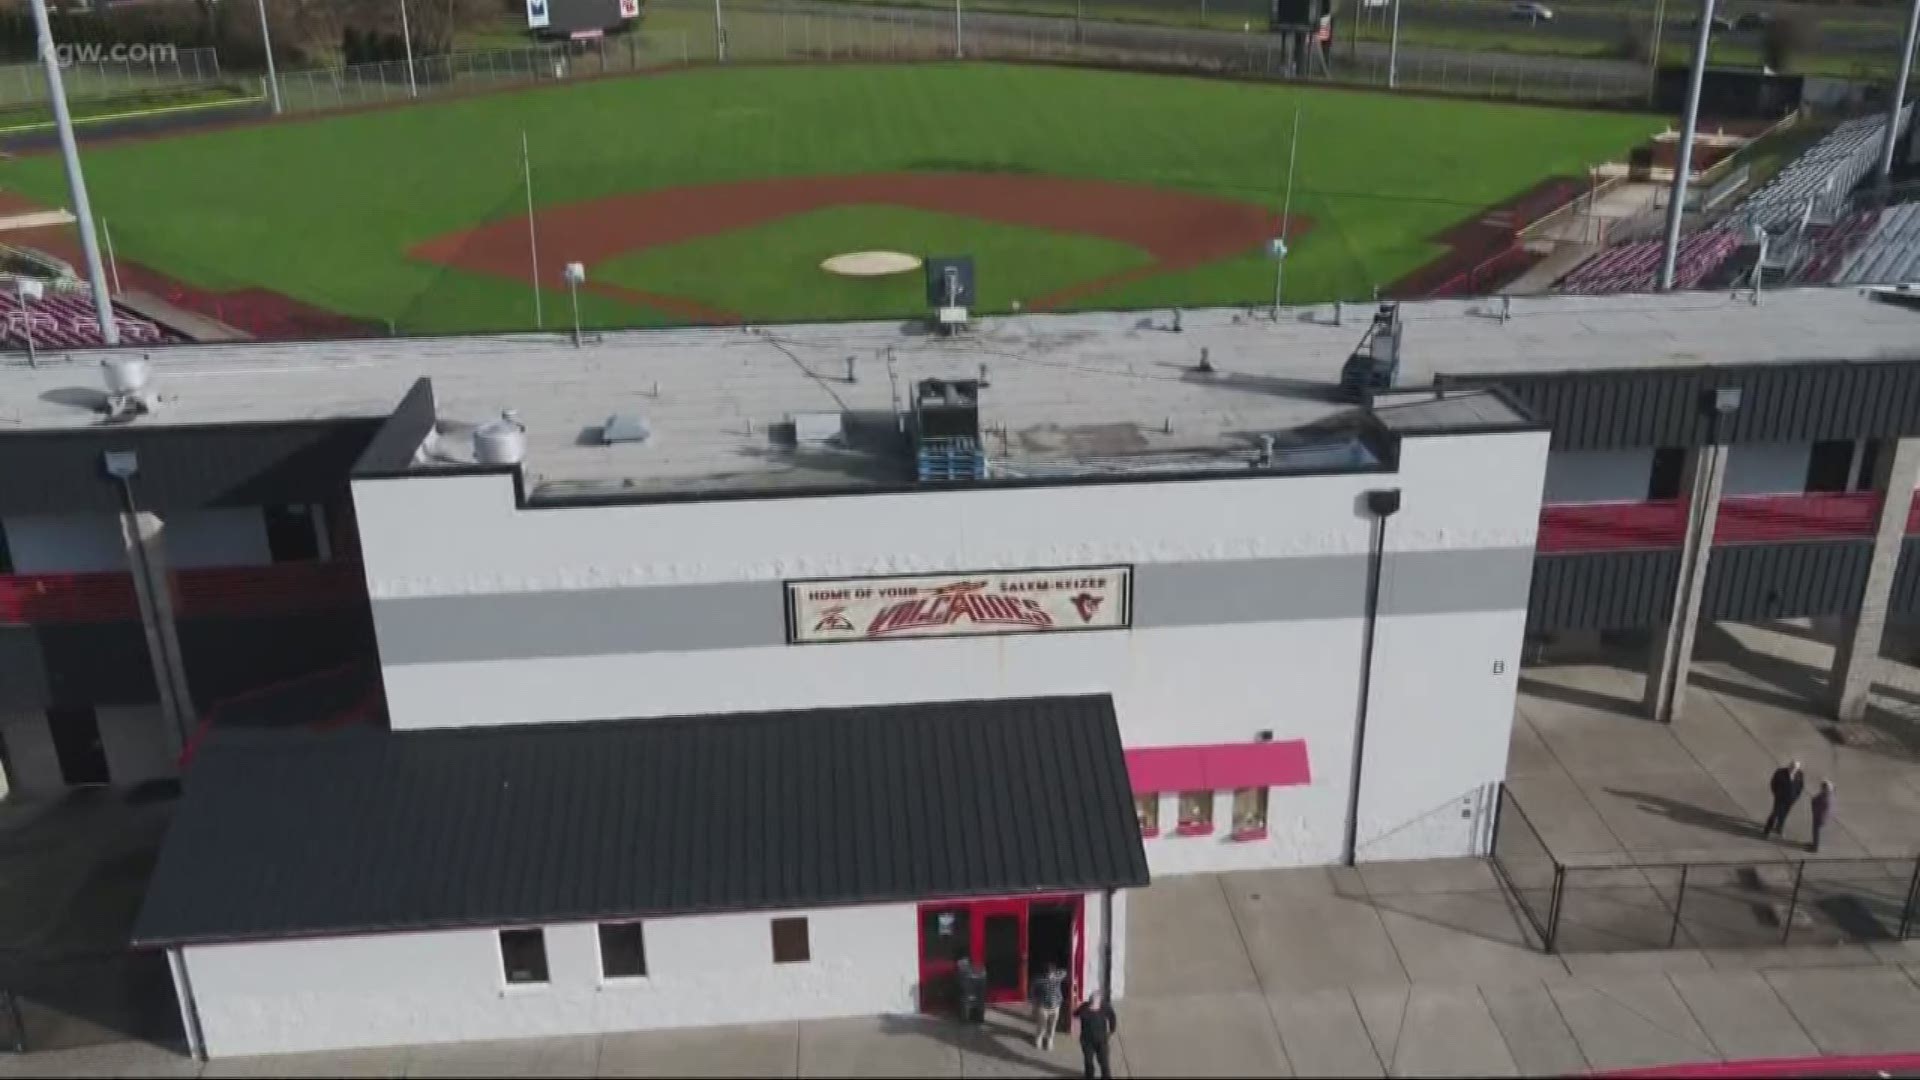 Major League Baseball could cut teams from the minor leagues. We look at an effort to save the team in Keizer.